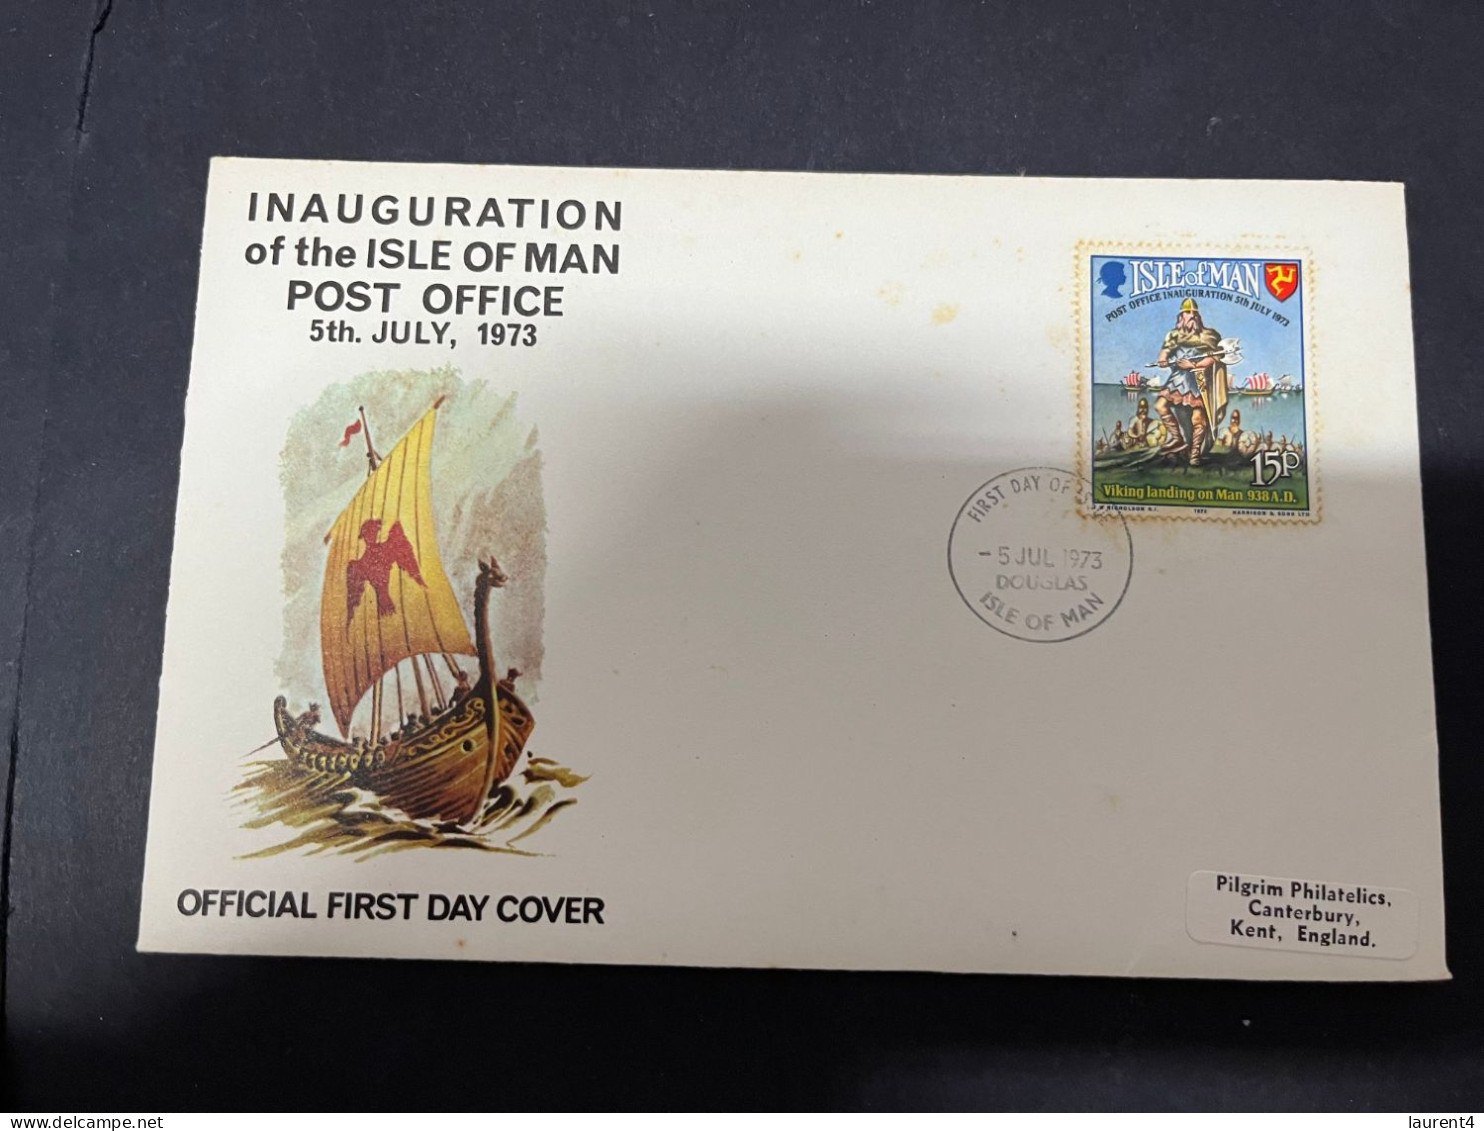 8-5-2024 (4 Z 29)  FDC (Isle Of Man) Europa 1973 - Post Office Inauguaration ( Some Rust ) (19 X 10,5 Cm) With Insert - Isla De Man